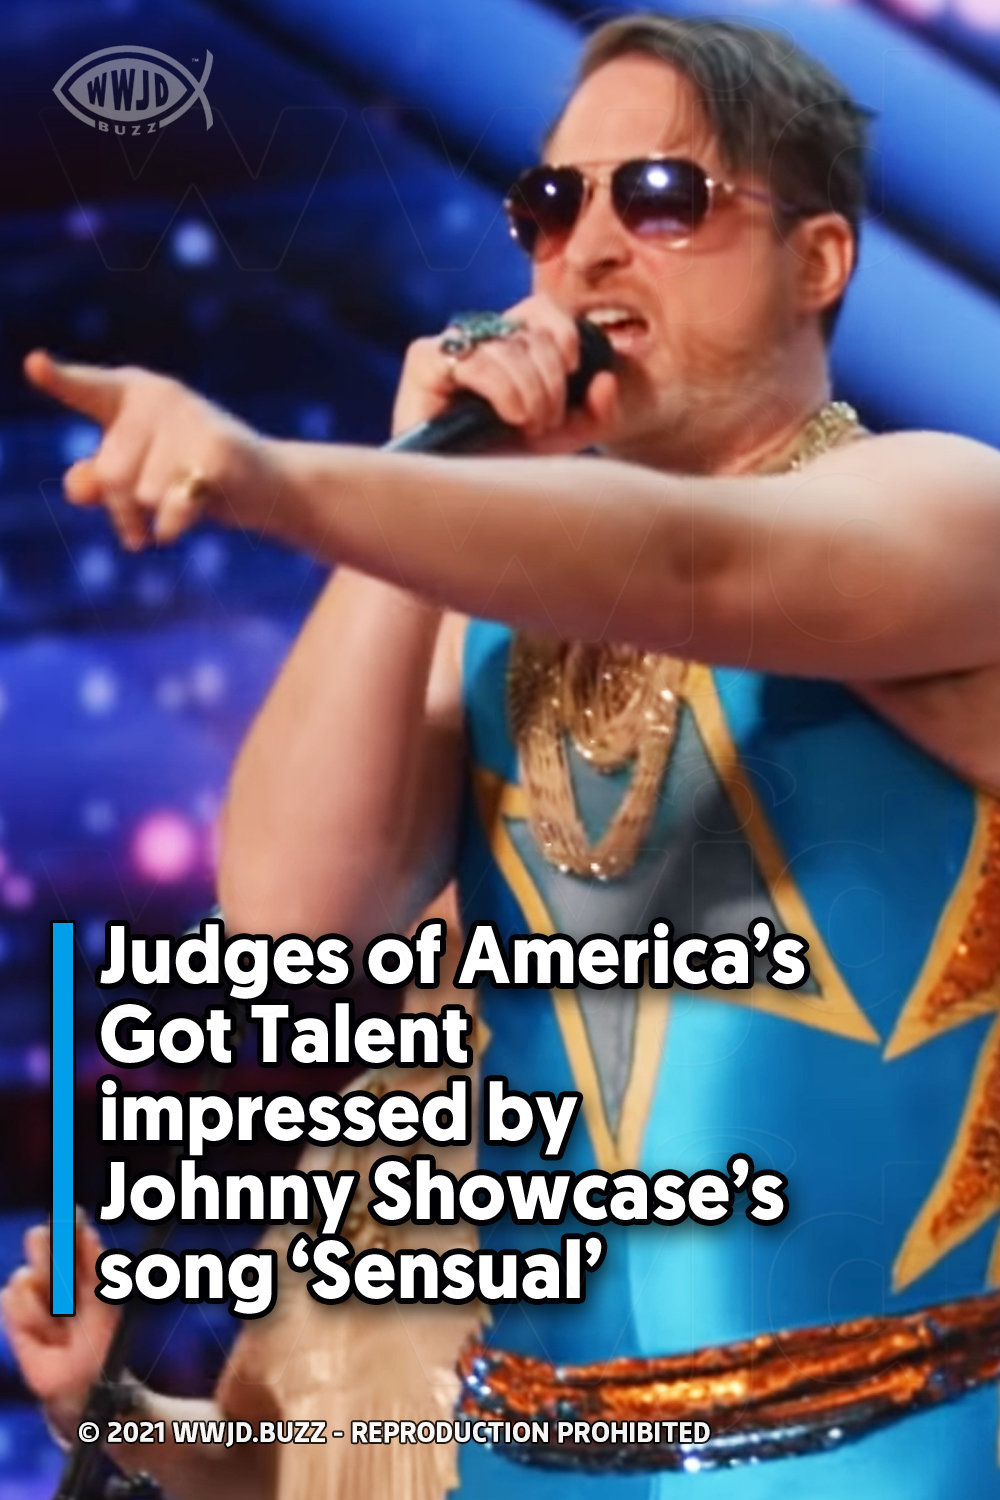 Judges of America’s Got Talent impressed by Johnny Showcase’s song “Sensual”